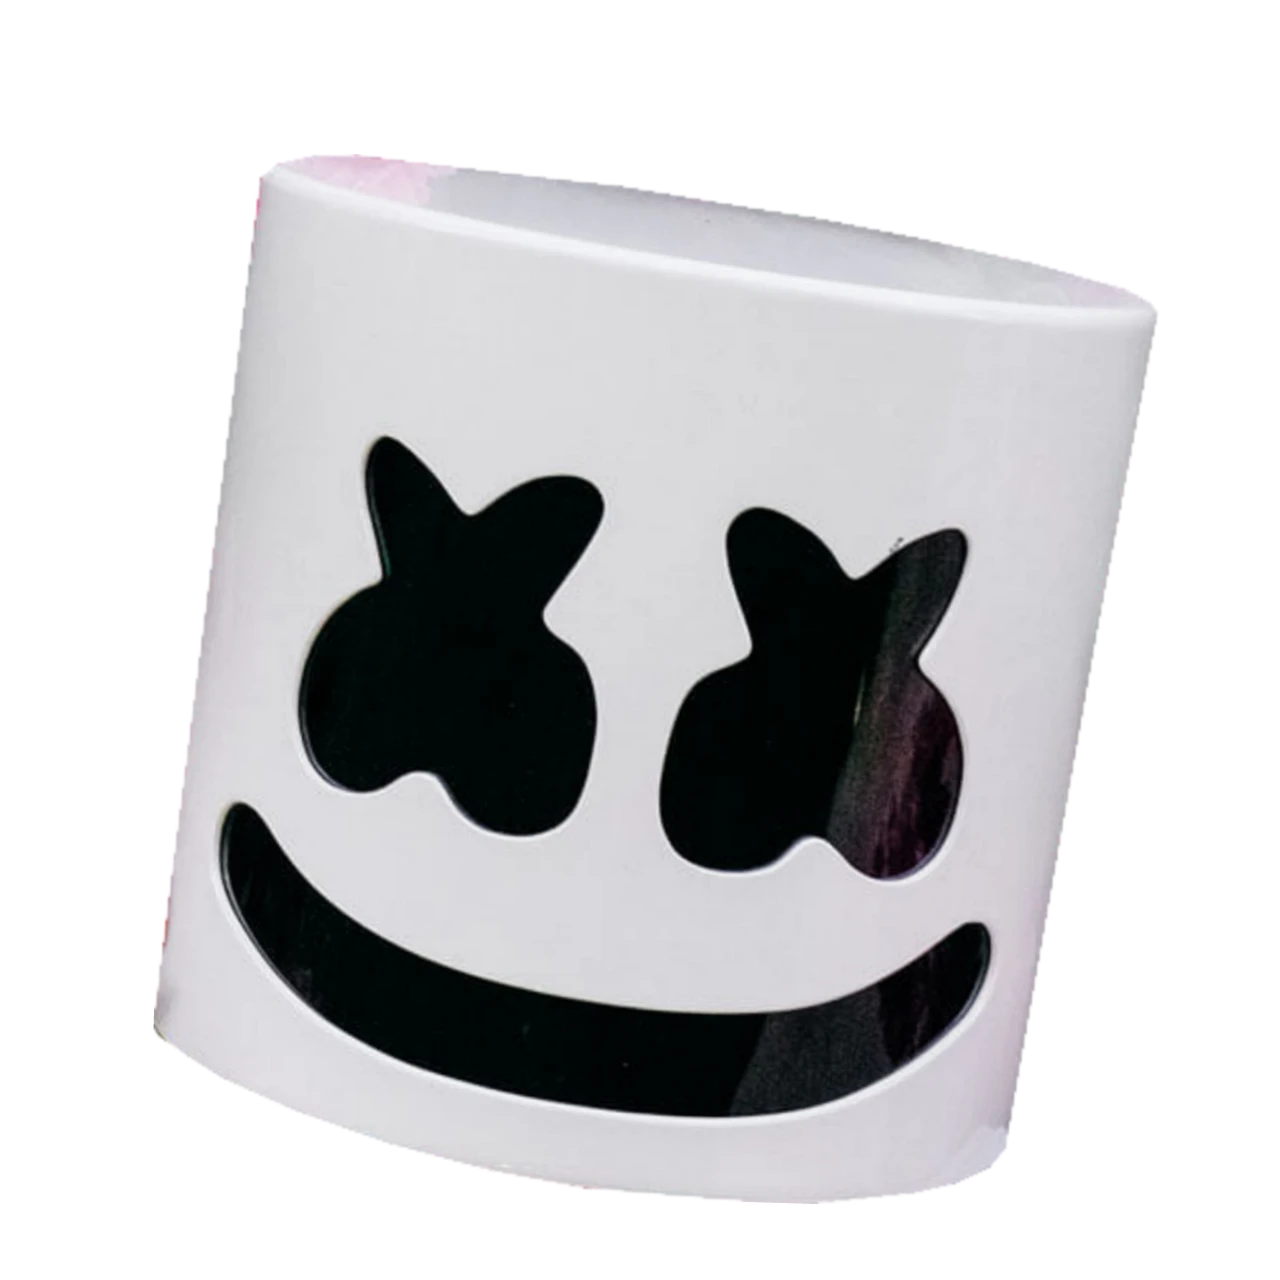 Popular And Trending Marshmello Stickers On Picsart